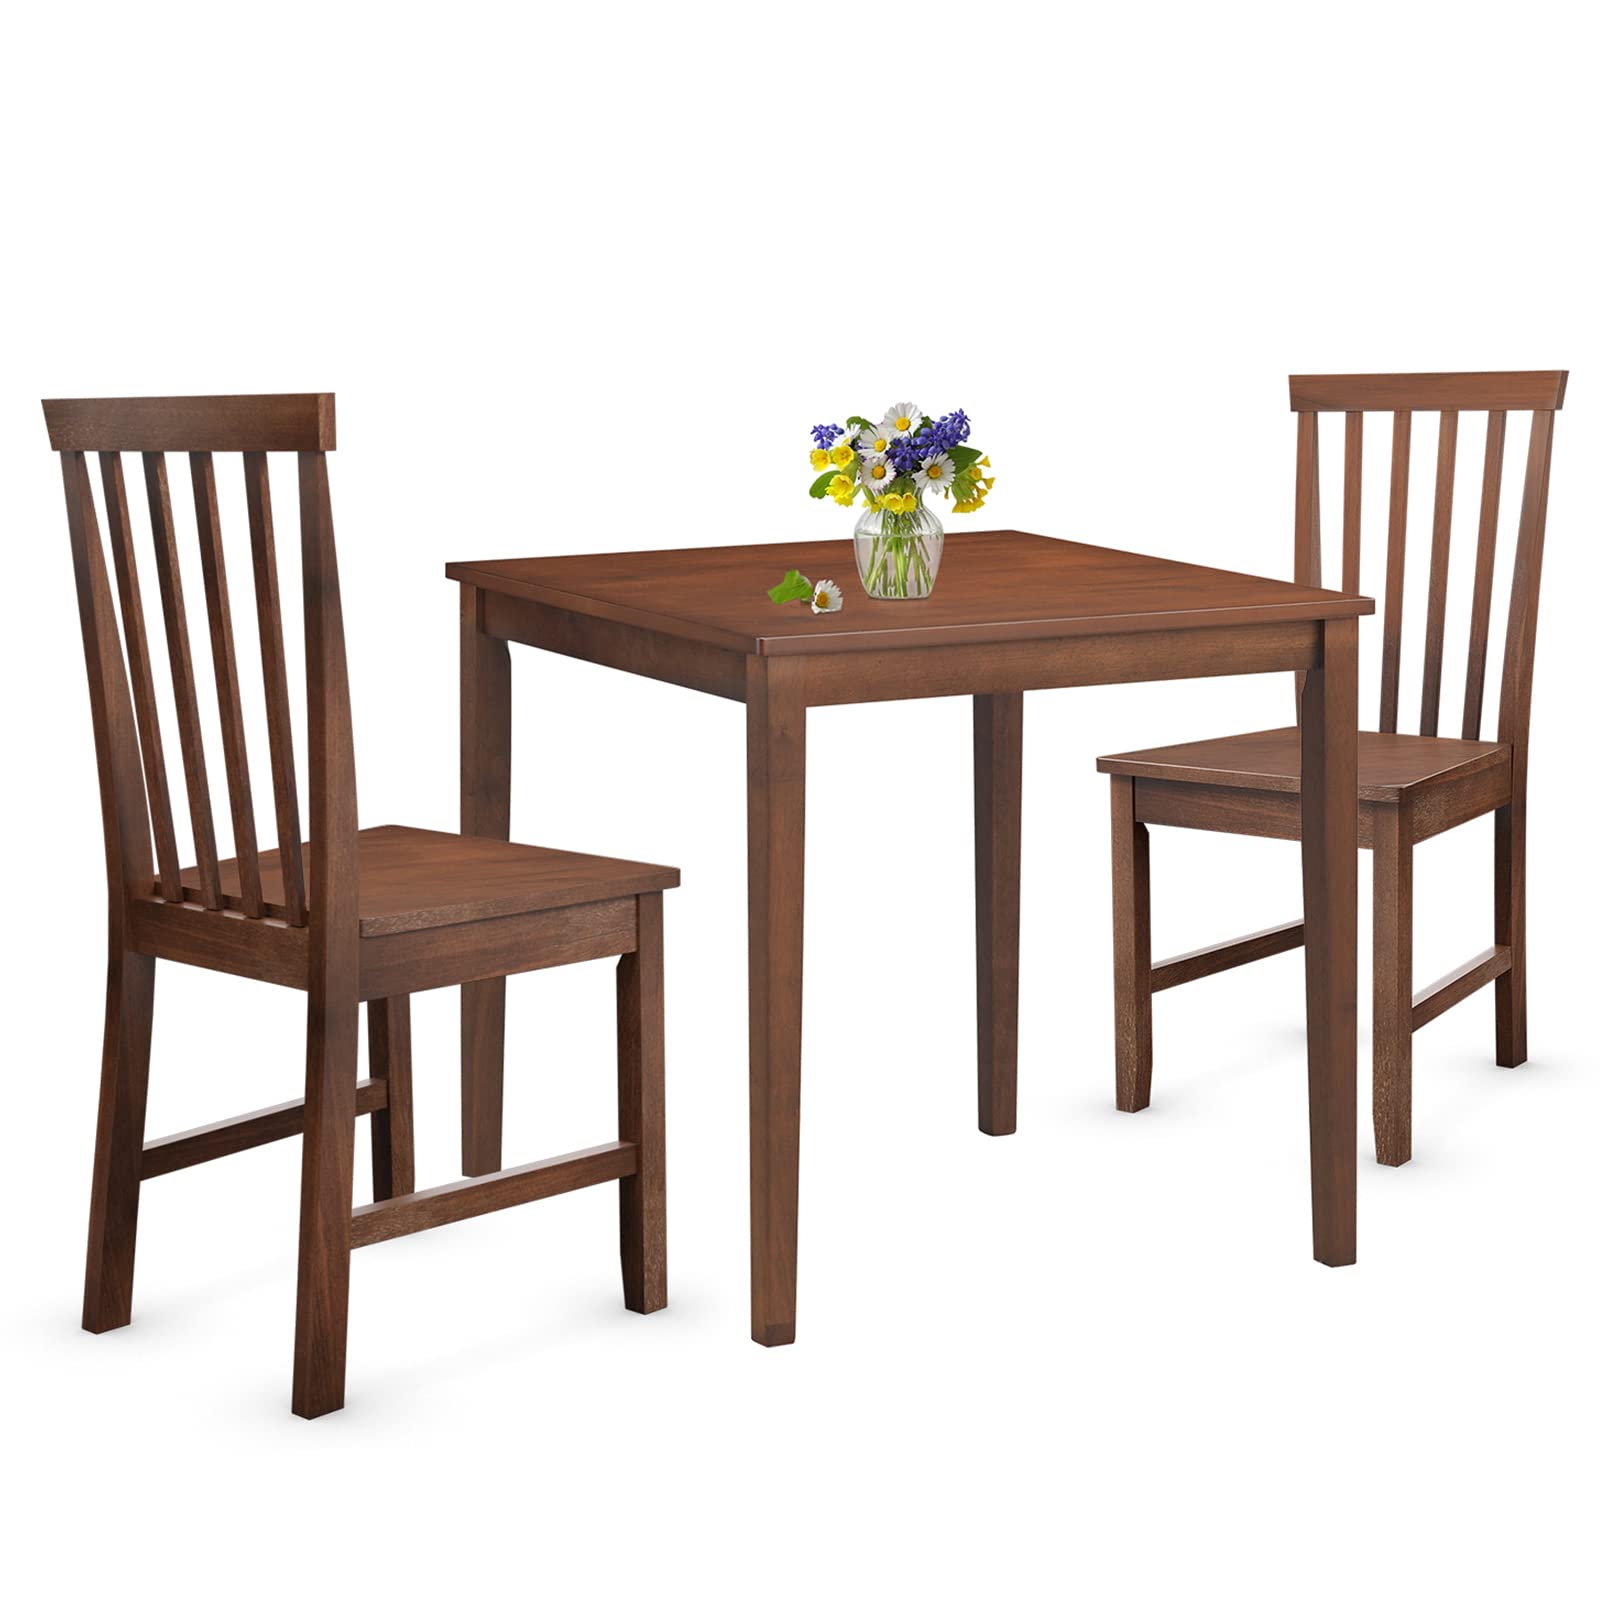 Giantex 3-Piece Wood Dining Table Set, Rustic Style Kitchen Table Set for 2-Person